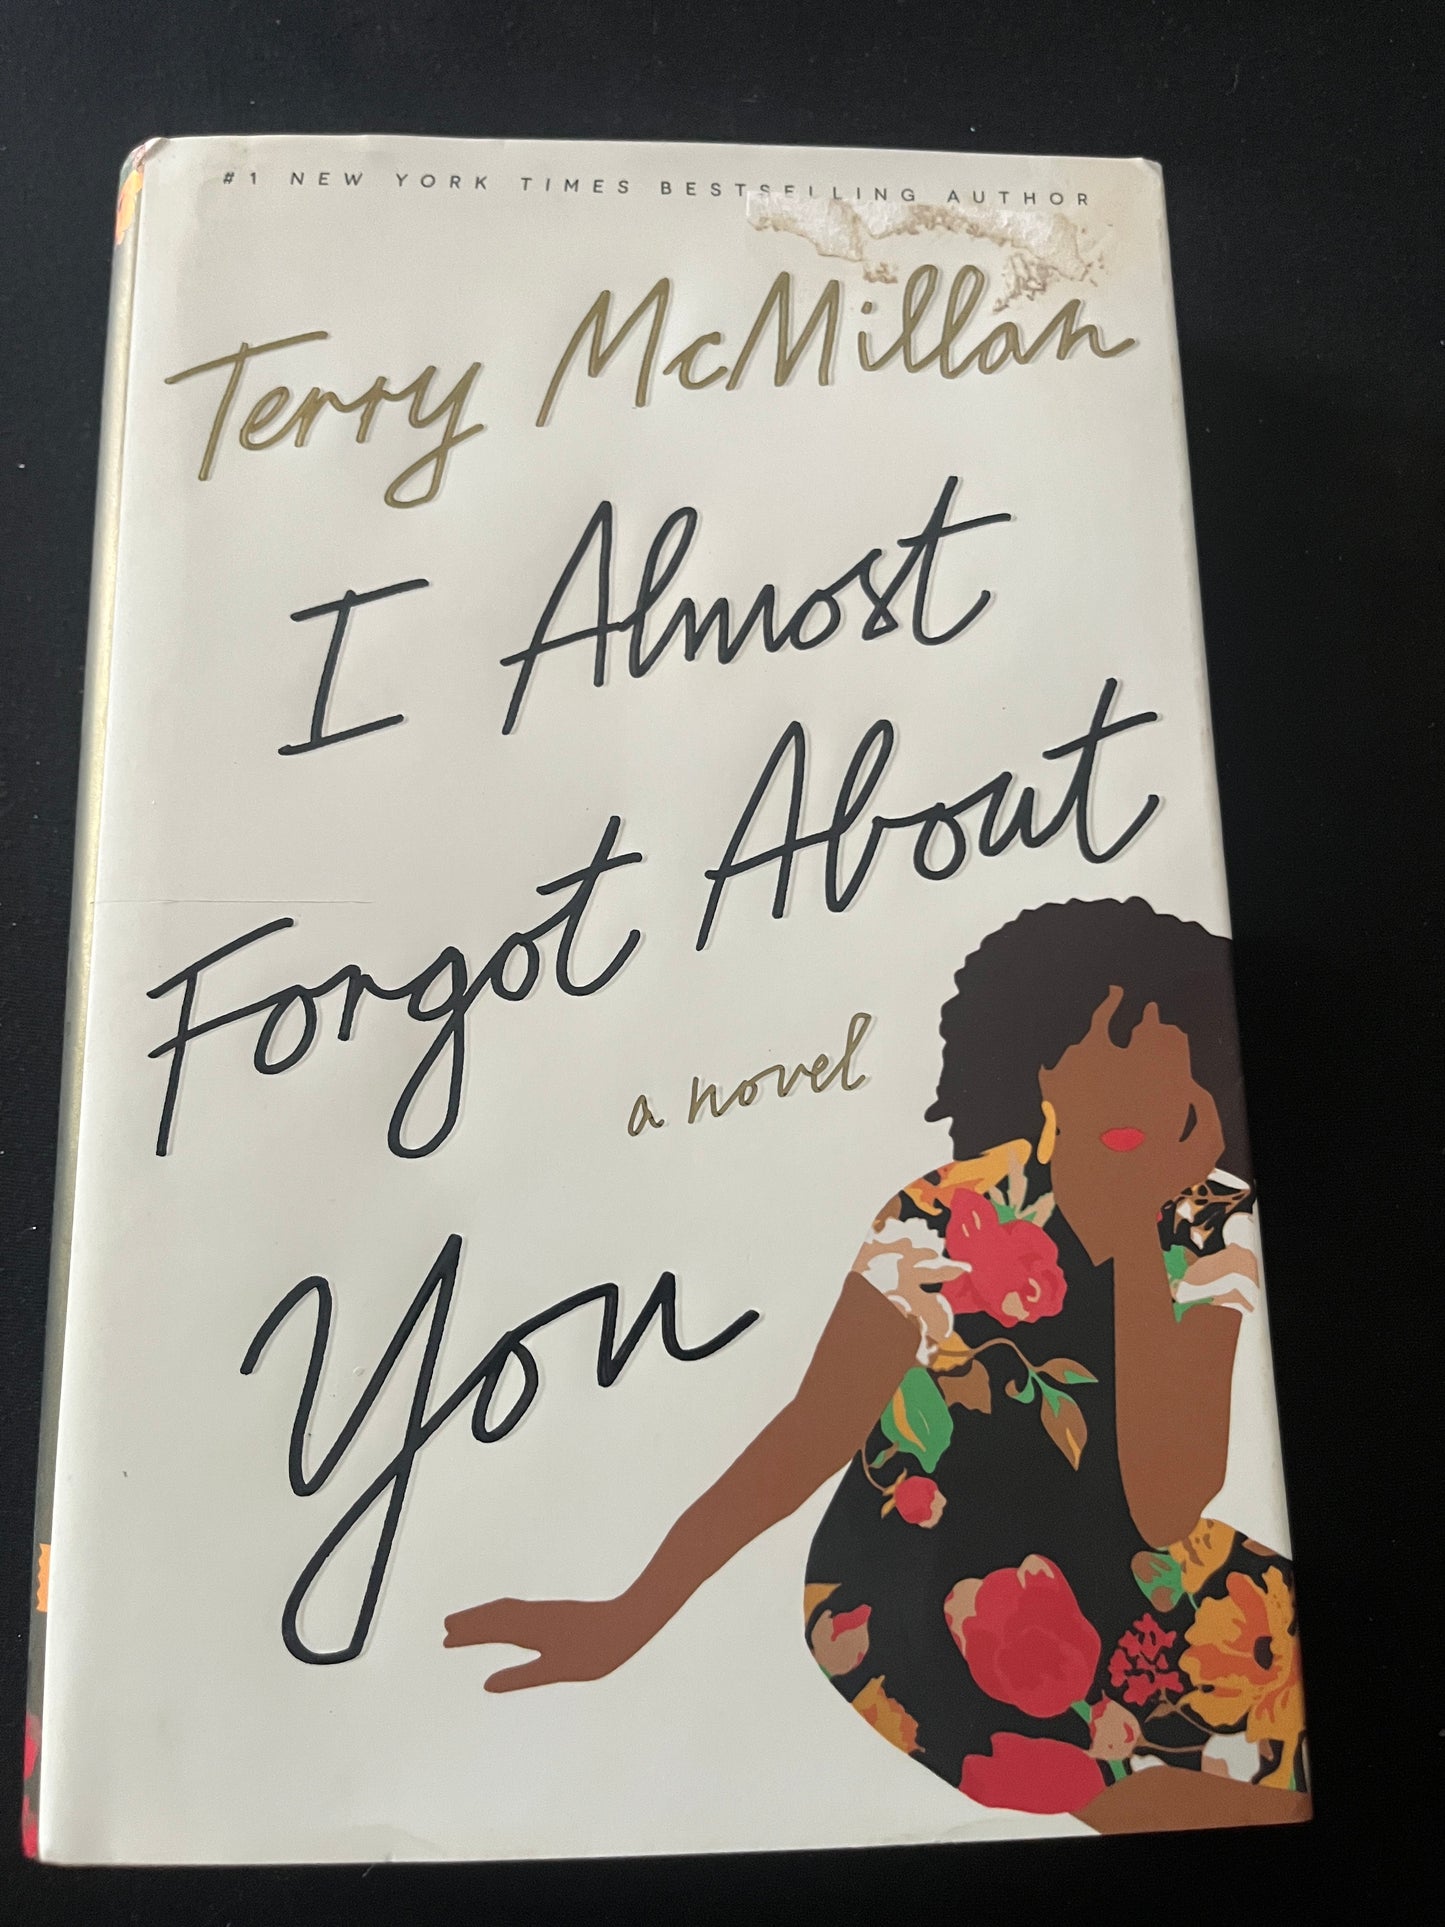 I ALMOST FORGOT ABOUT YOU by Terry McMillan